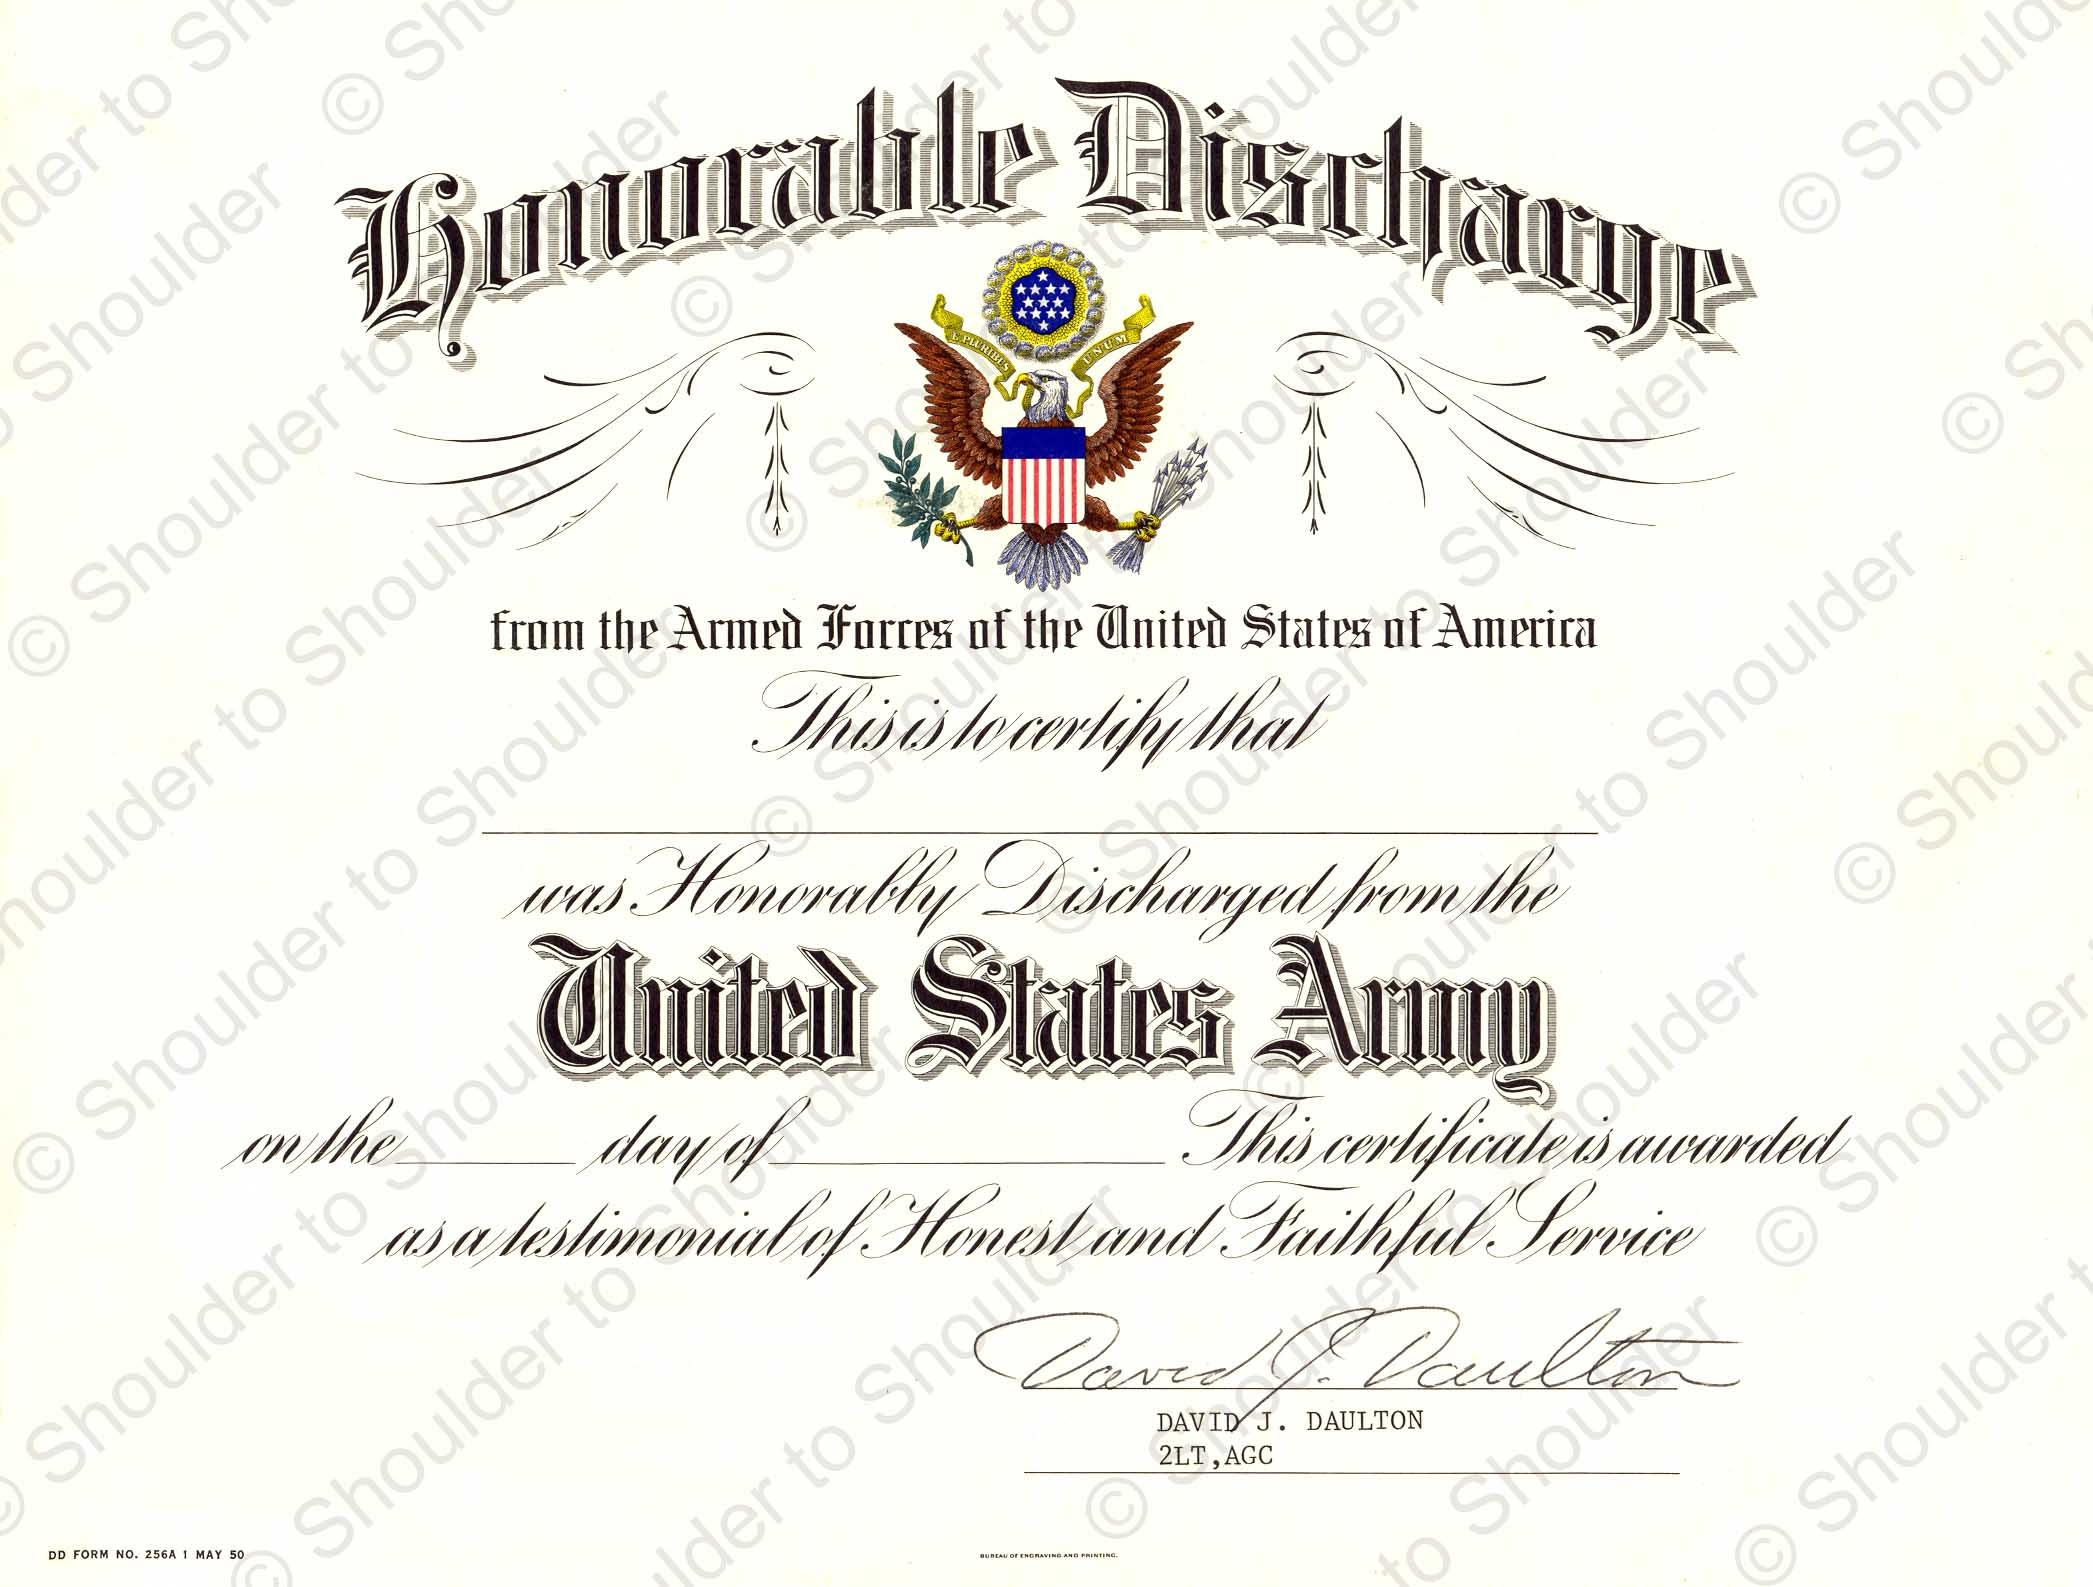 United States Army Discharge Certificate - Viet Nam Era Type  For Certificate Of Achievement Army Template